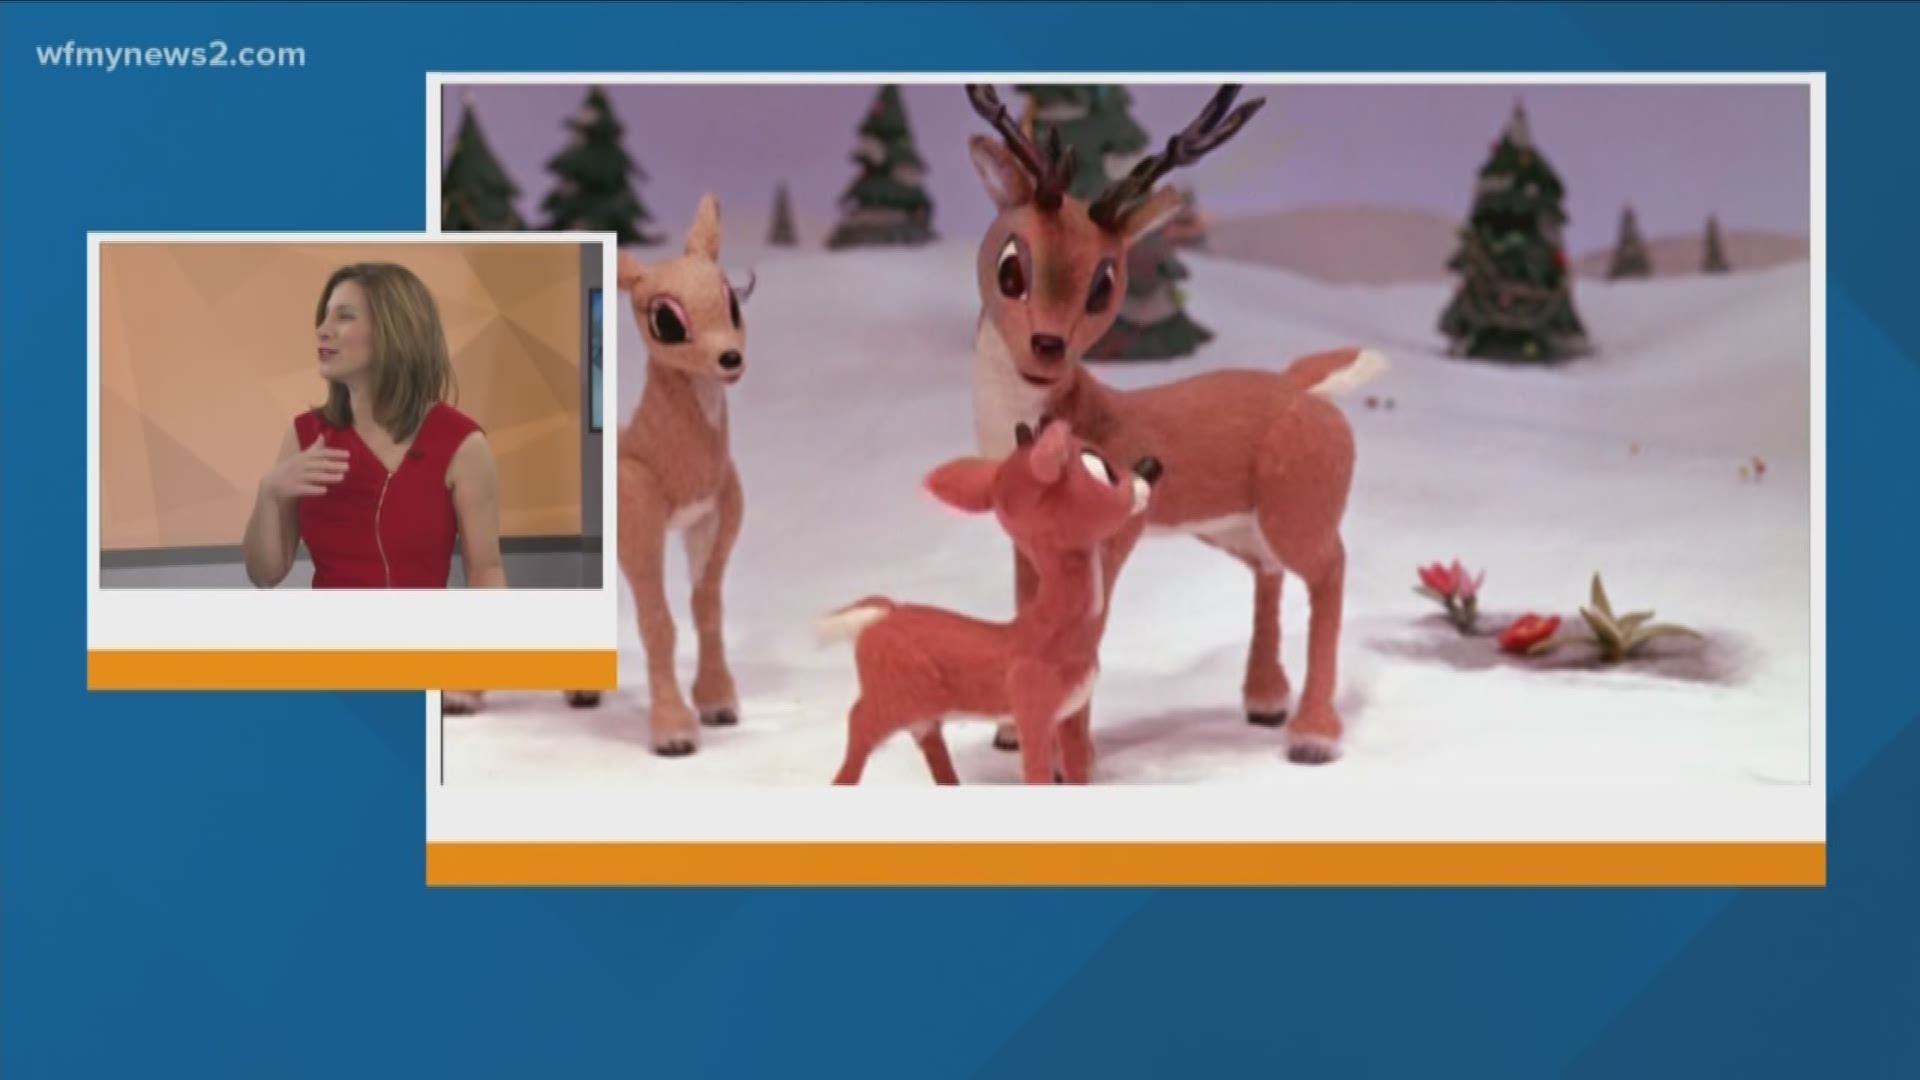 Banning Rudolph The Red-Nosed Reindeer?